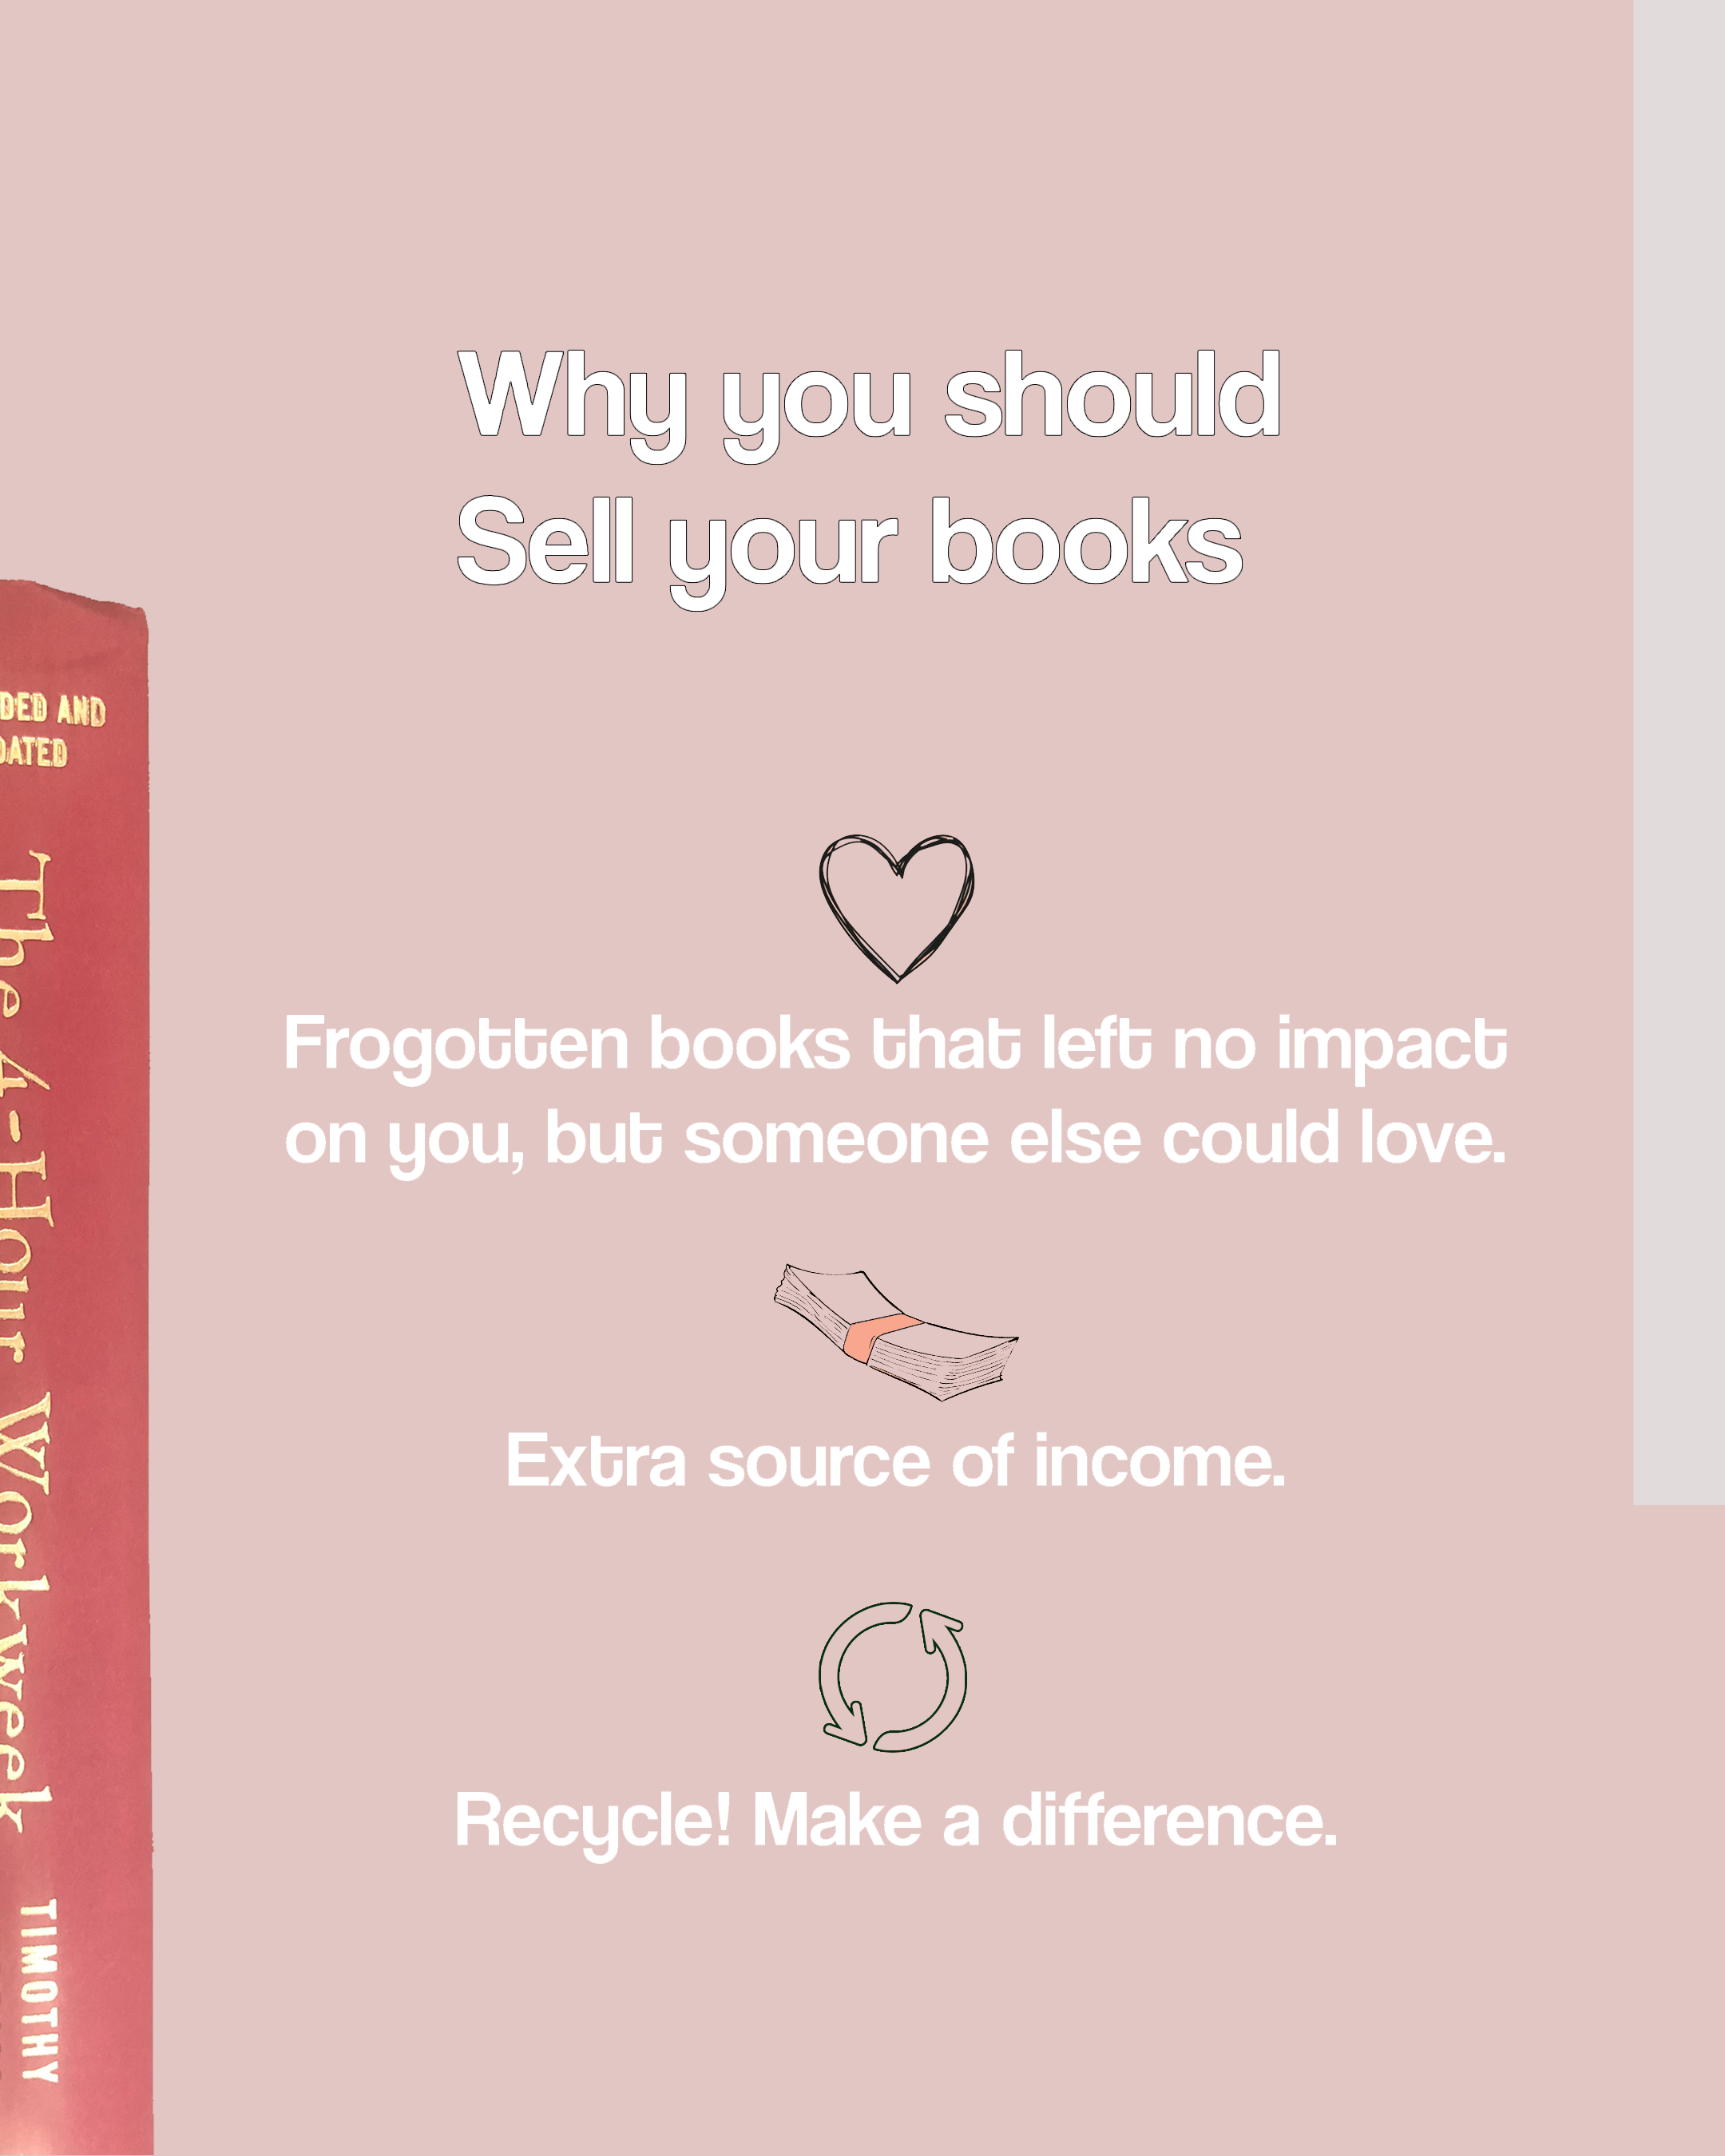 Selling your books